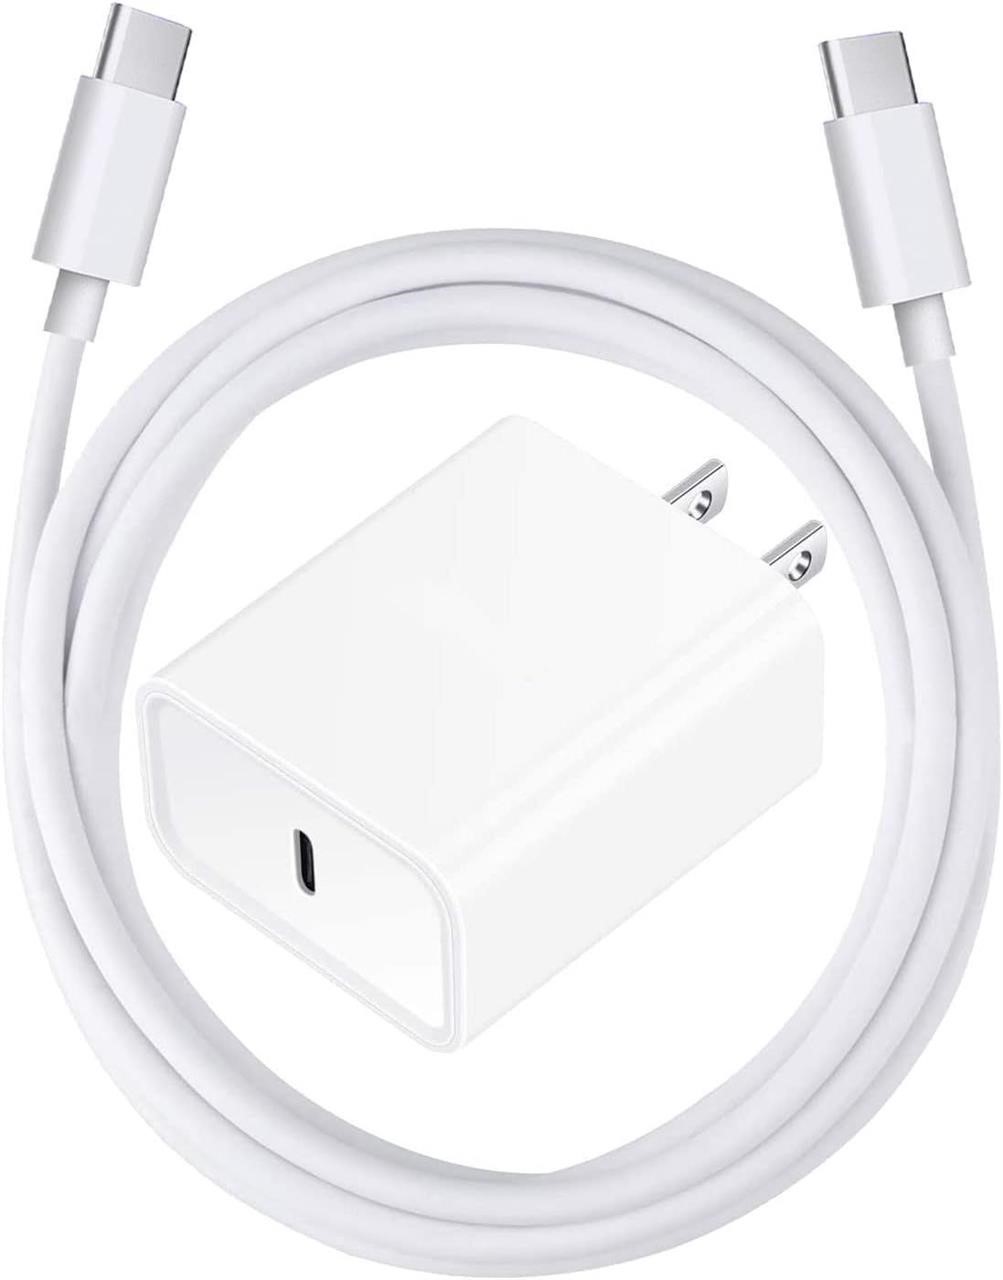 NEW Fast USB C Charger